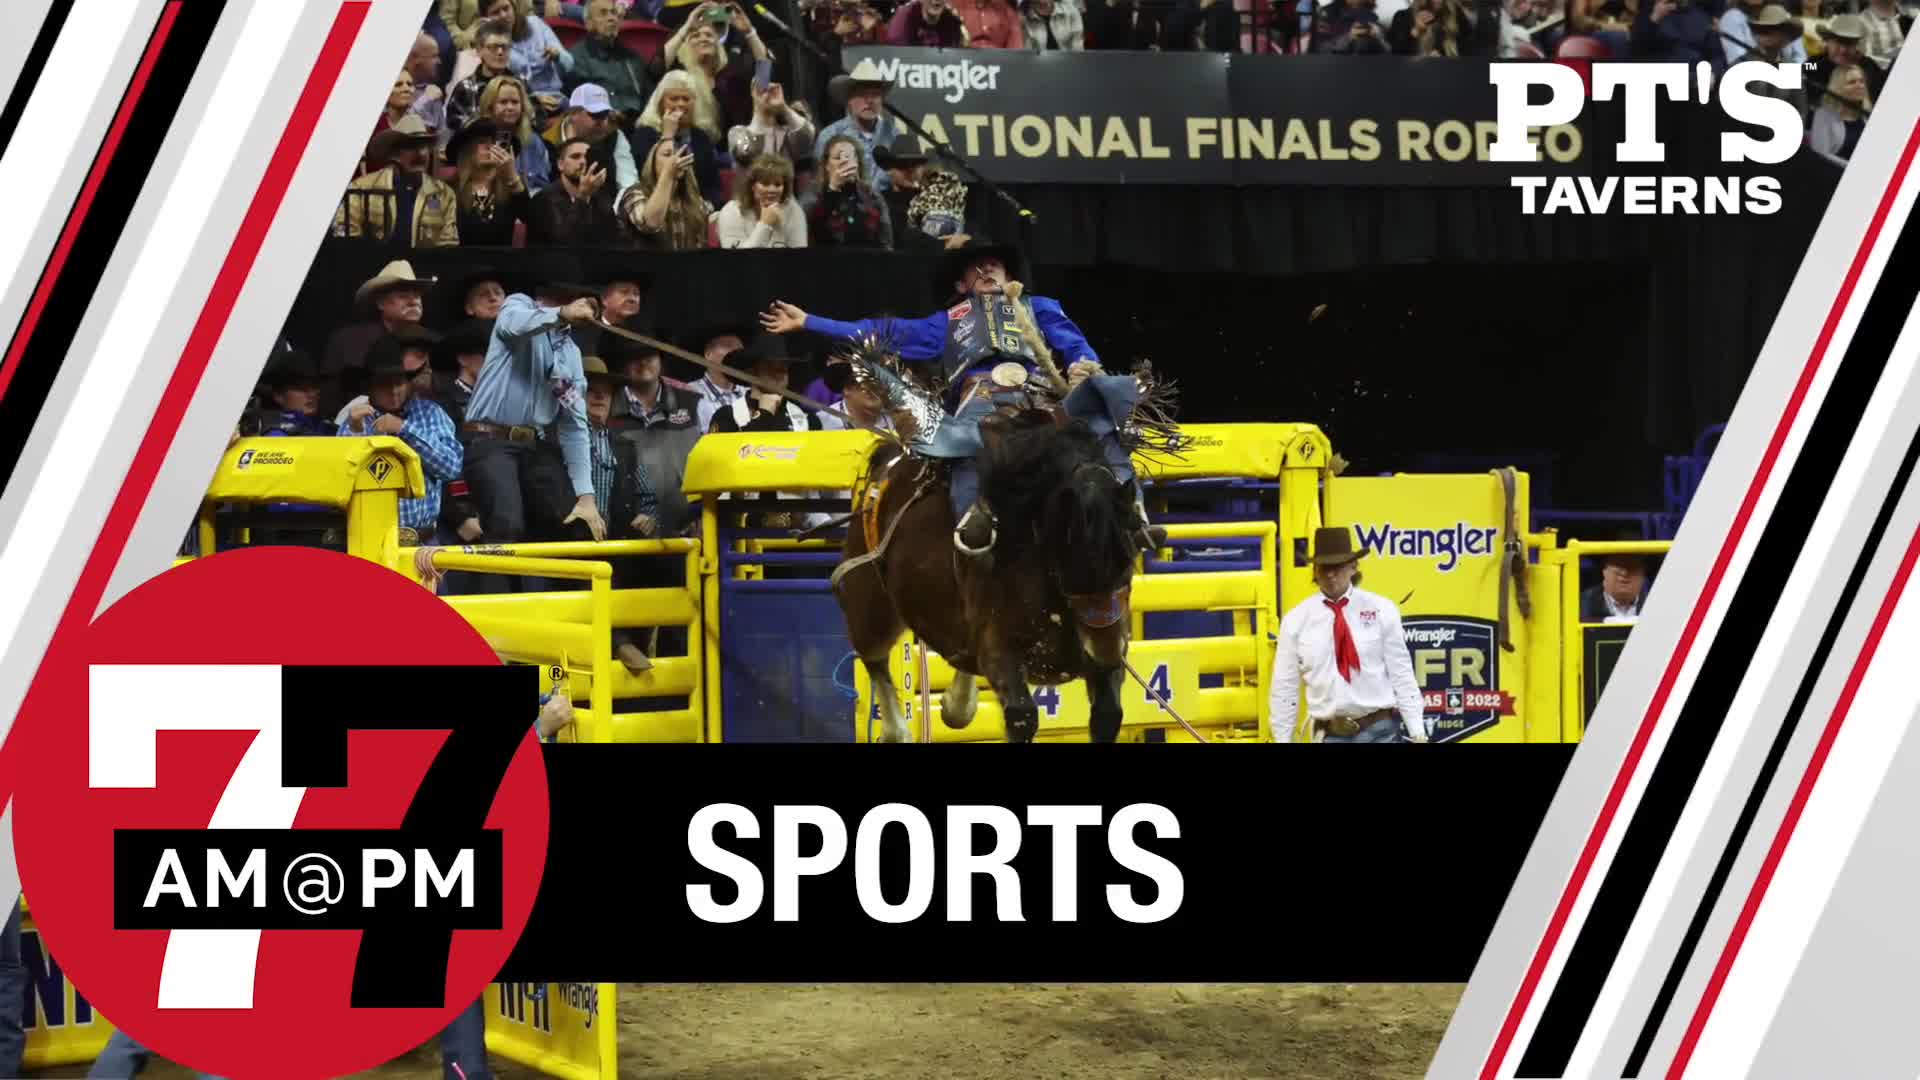 Rodeo champ won't compete in NFR